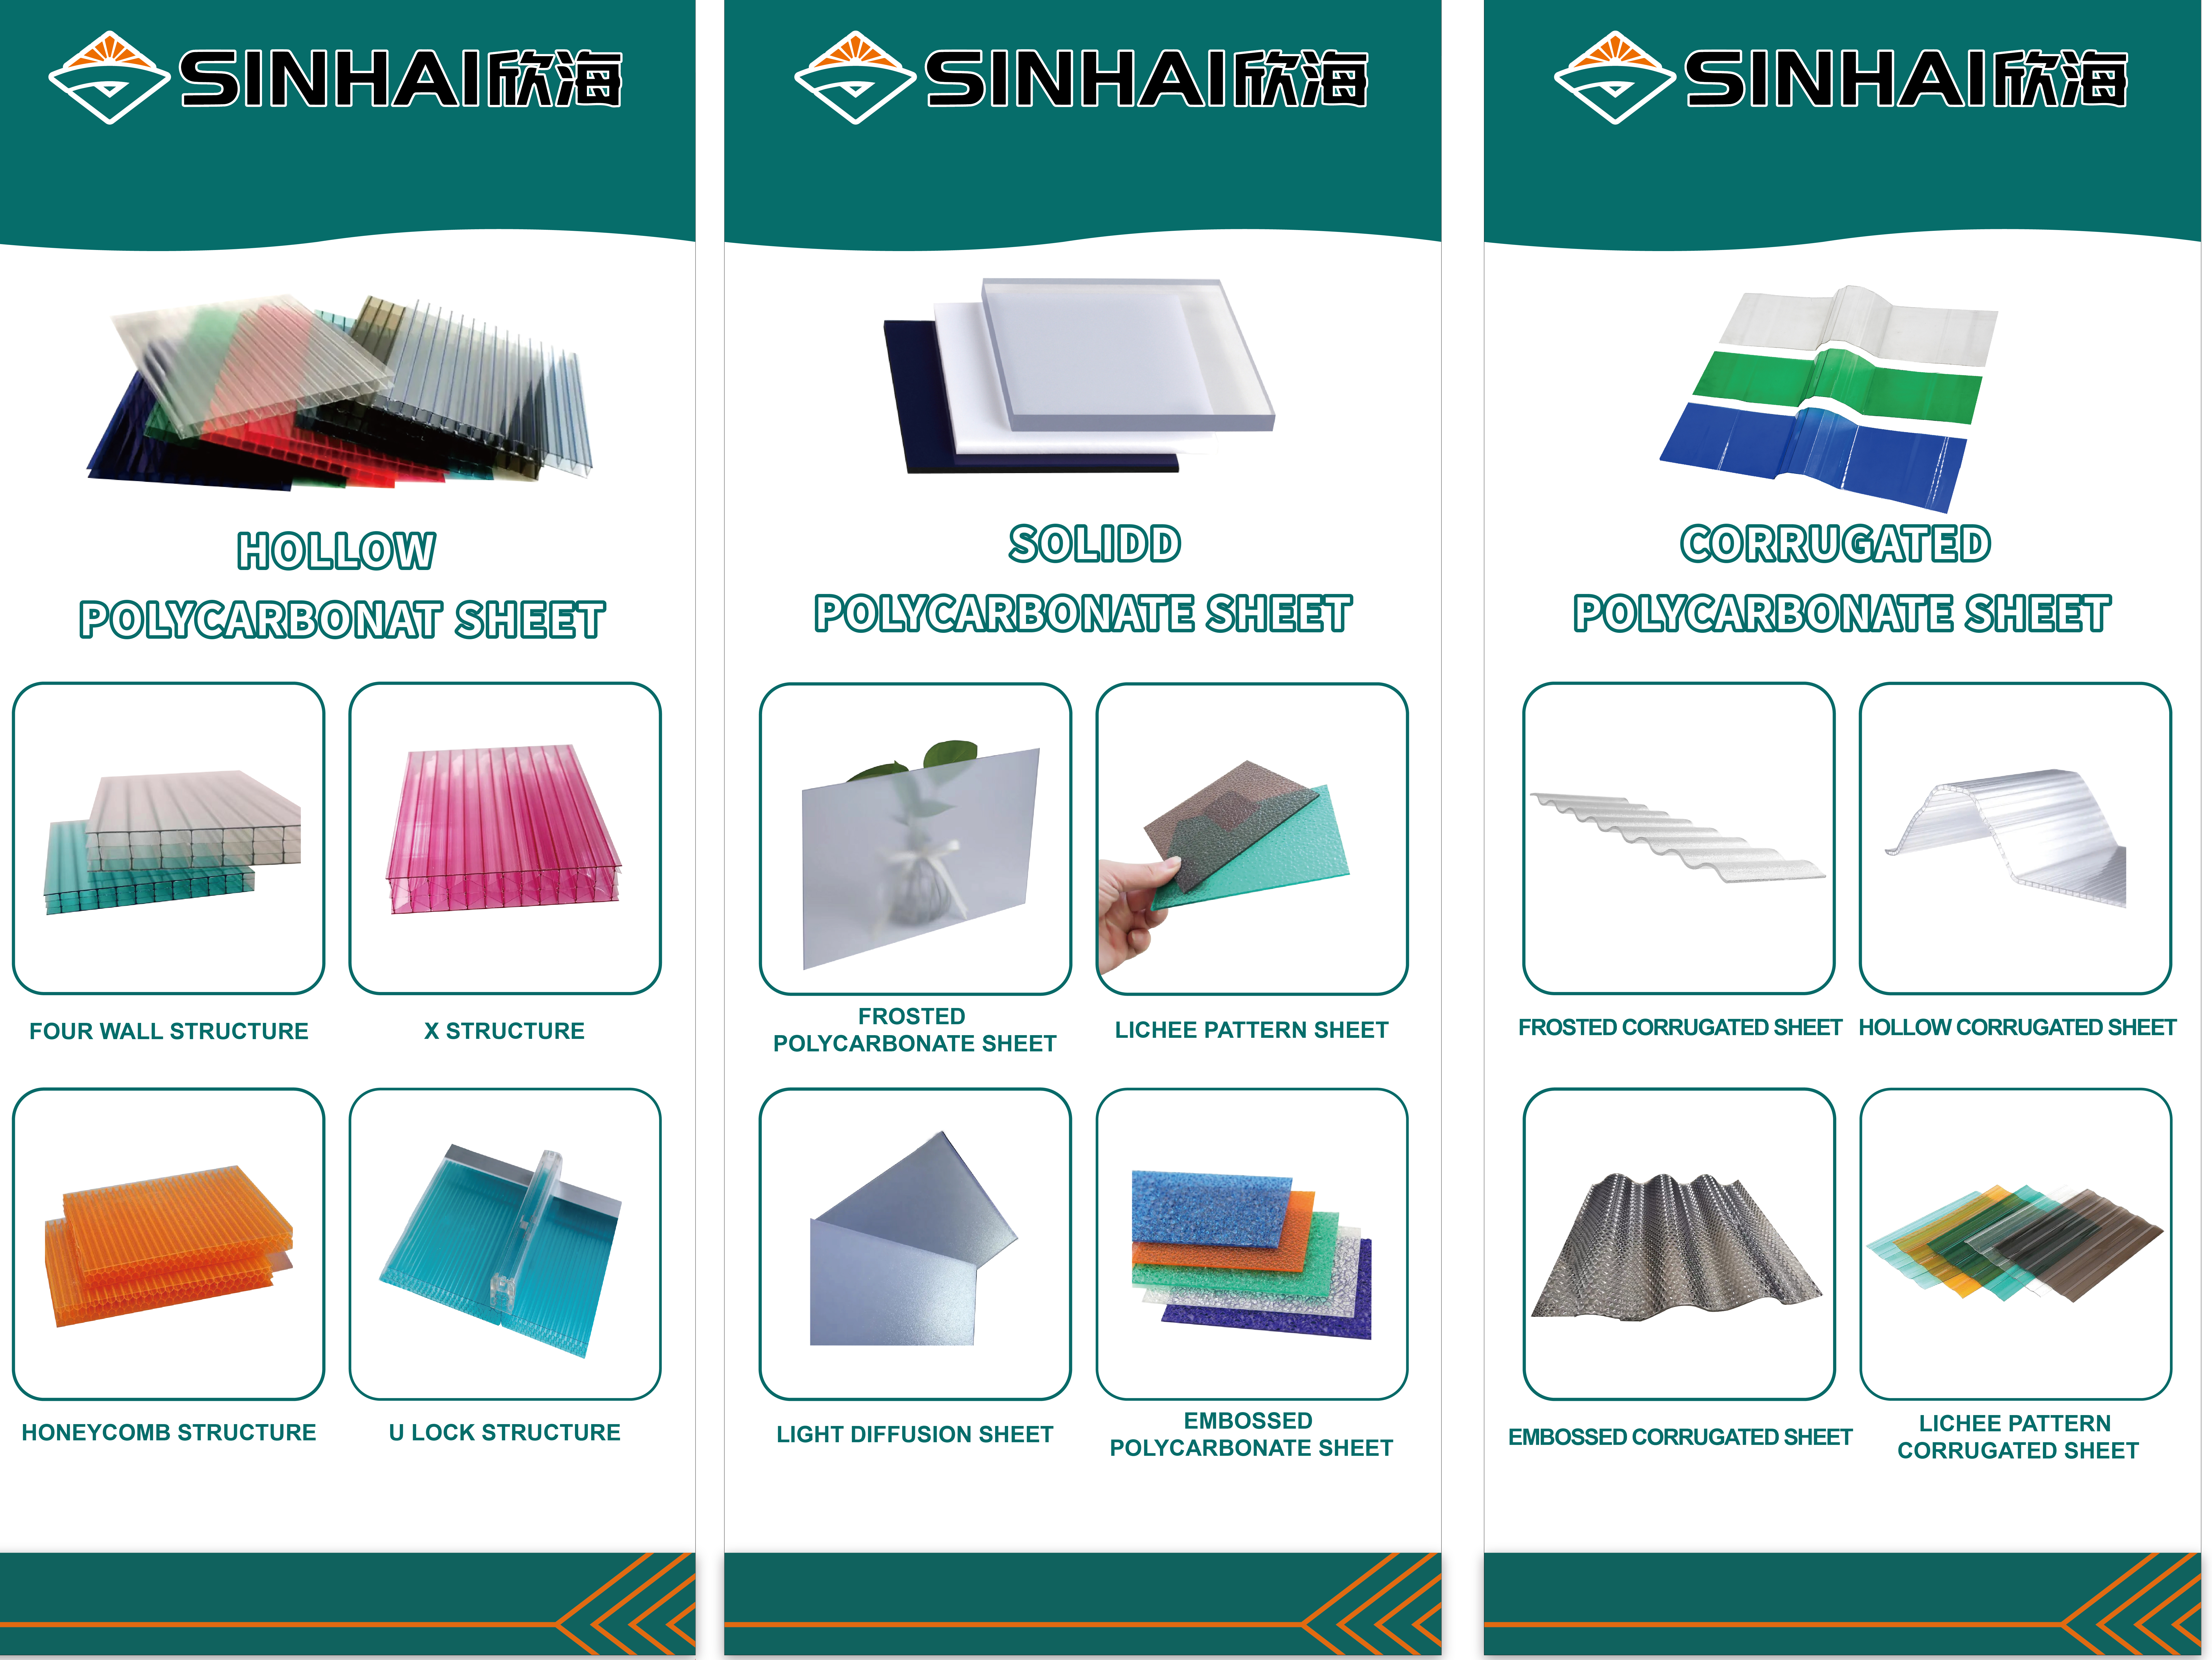 Which is better, hollow polycarbonate sheet or solid polycarbonate sheet?